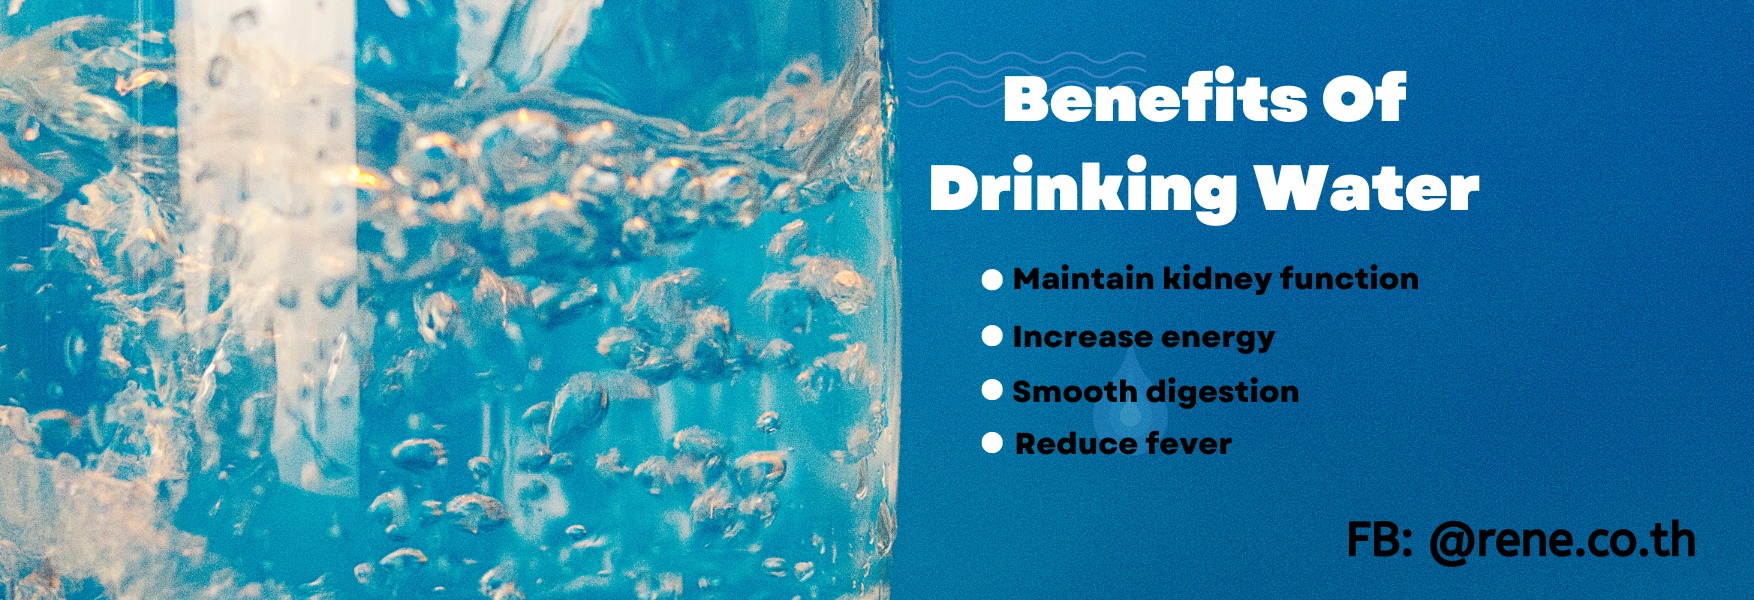 BENEFIT OF DRINKING WATER